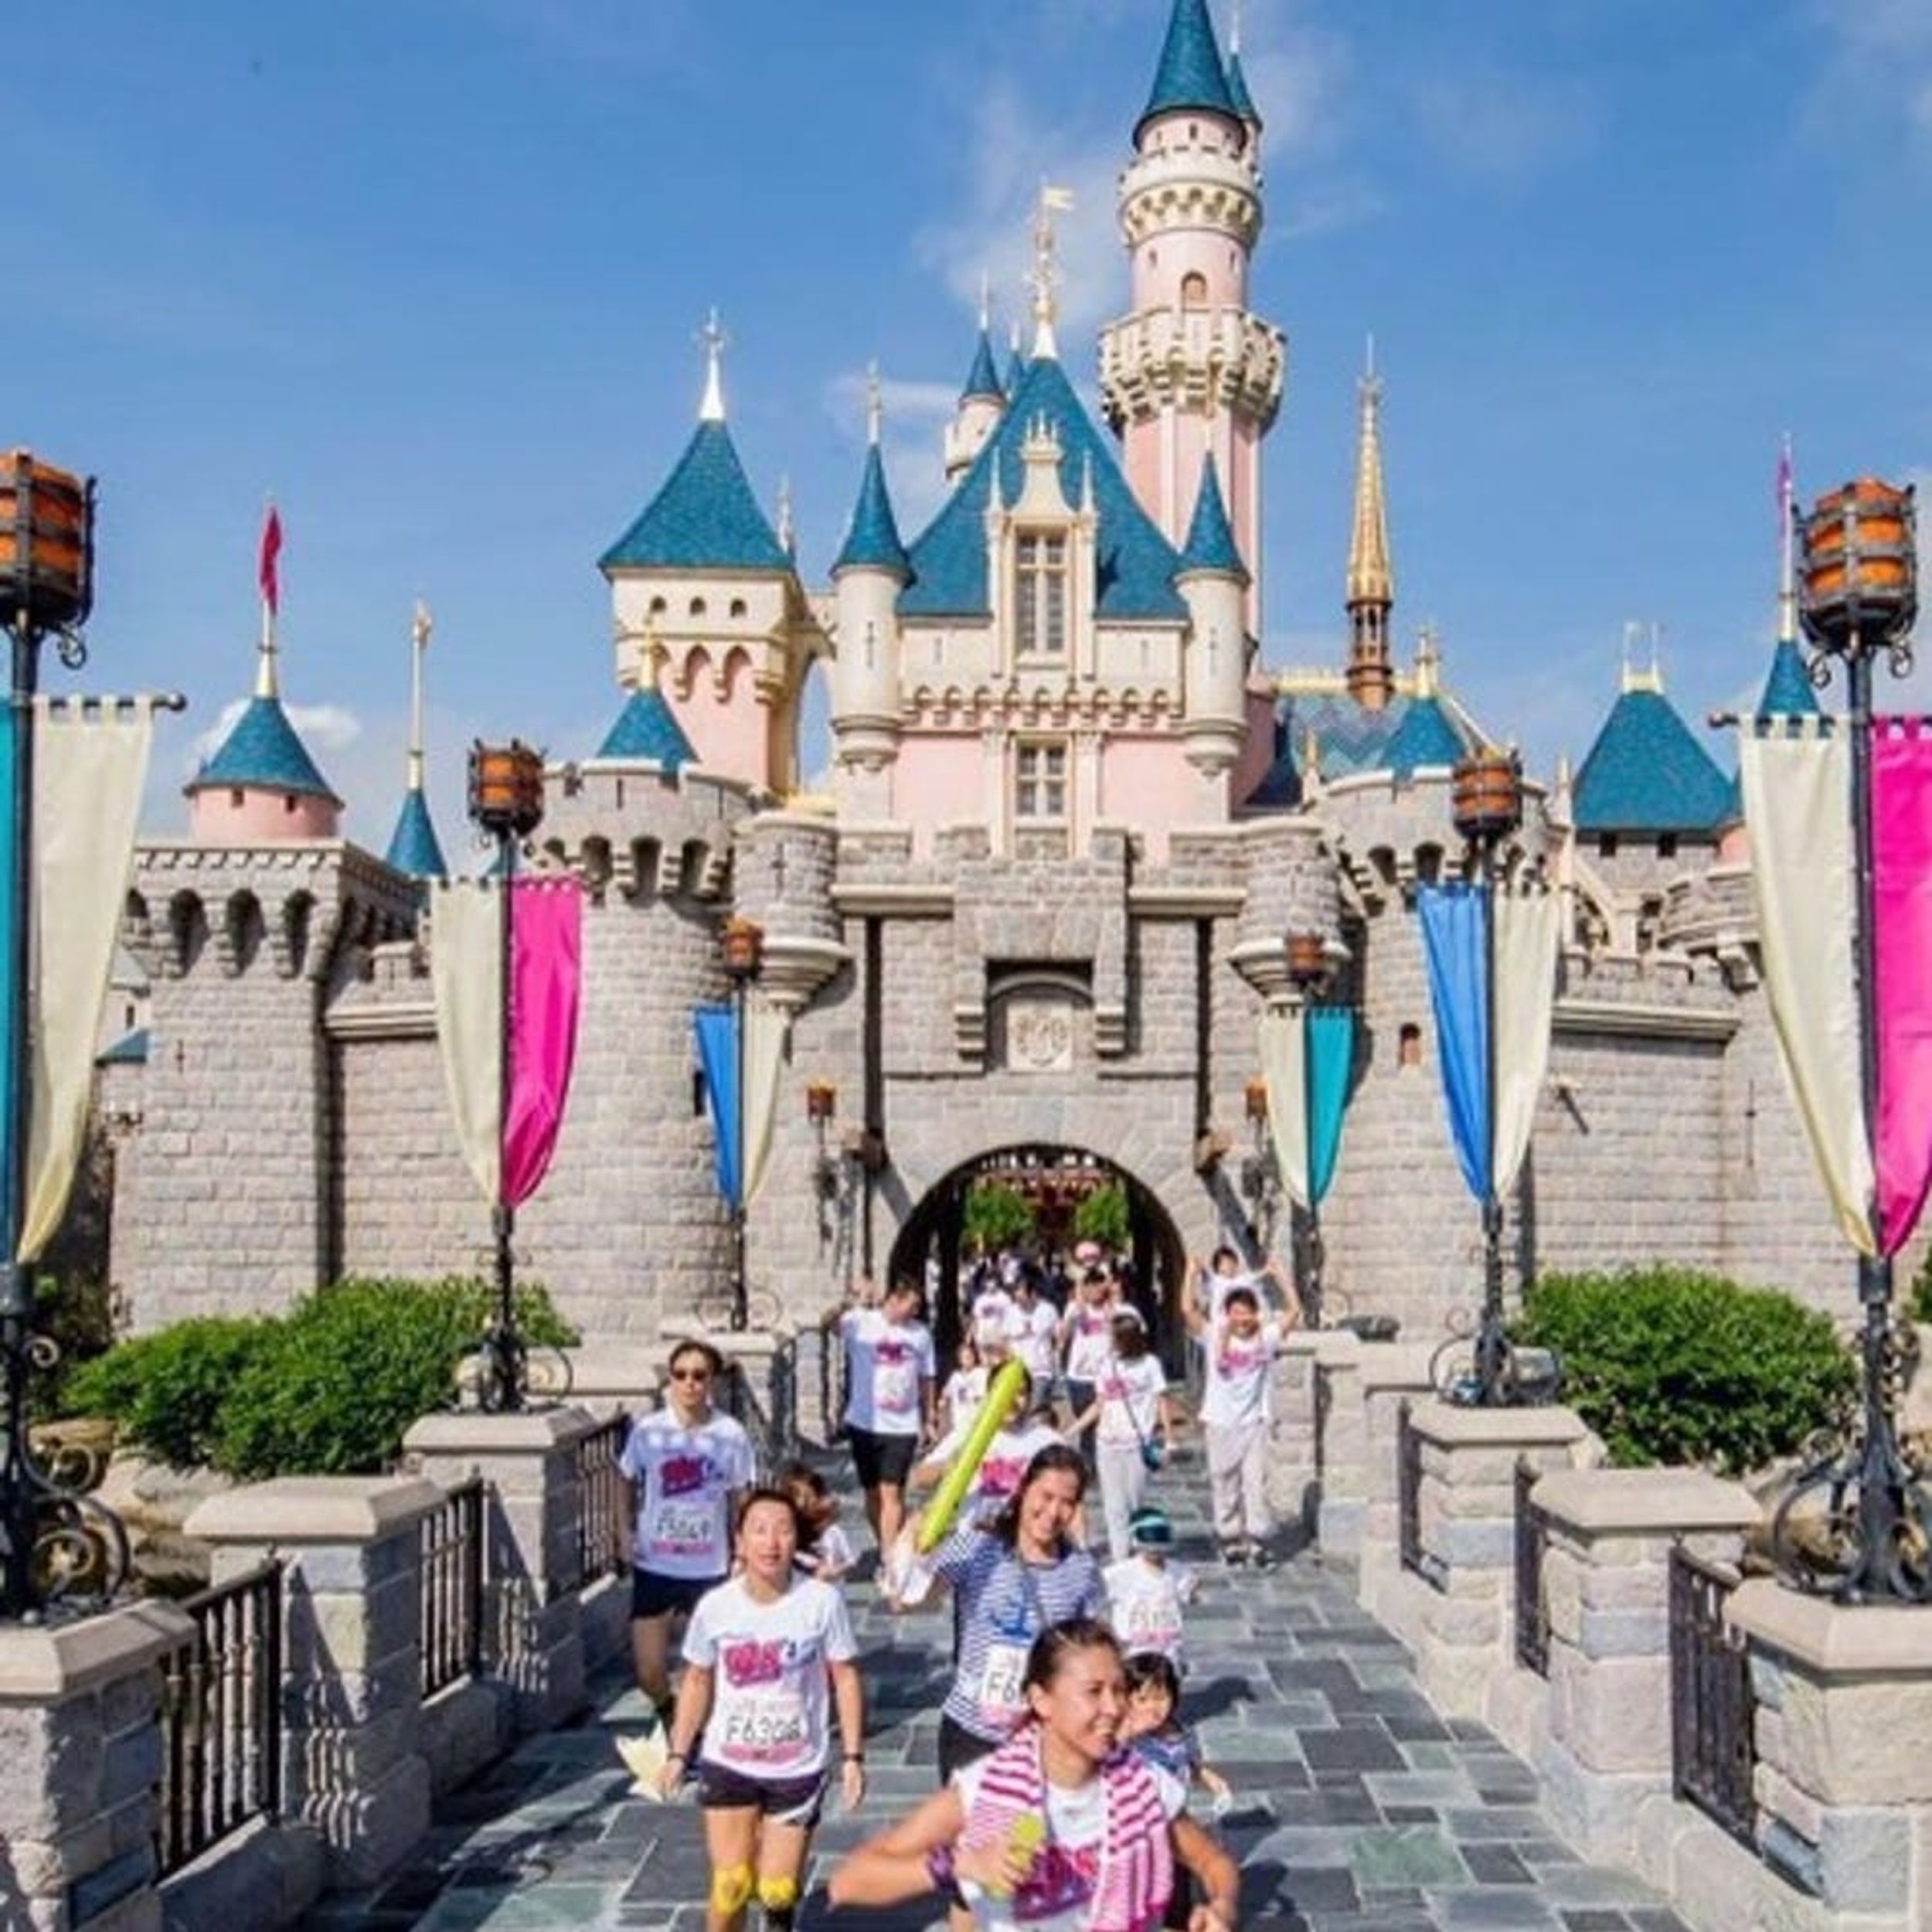 This Disney Park Is Sadly Getting Rid of Their Sleeping Beauty Castle